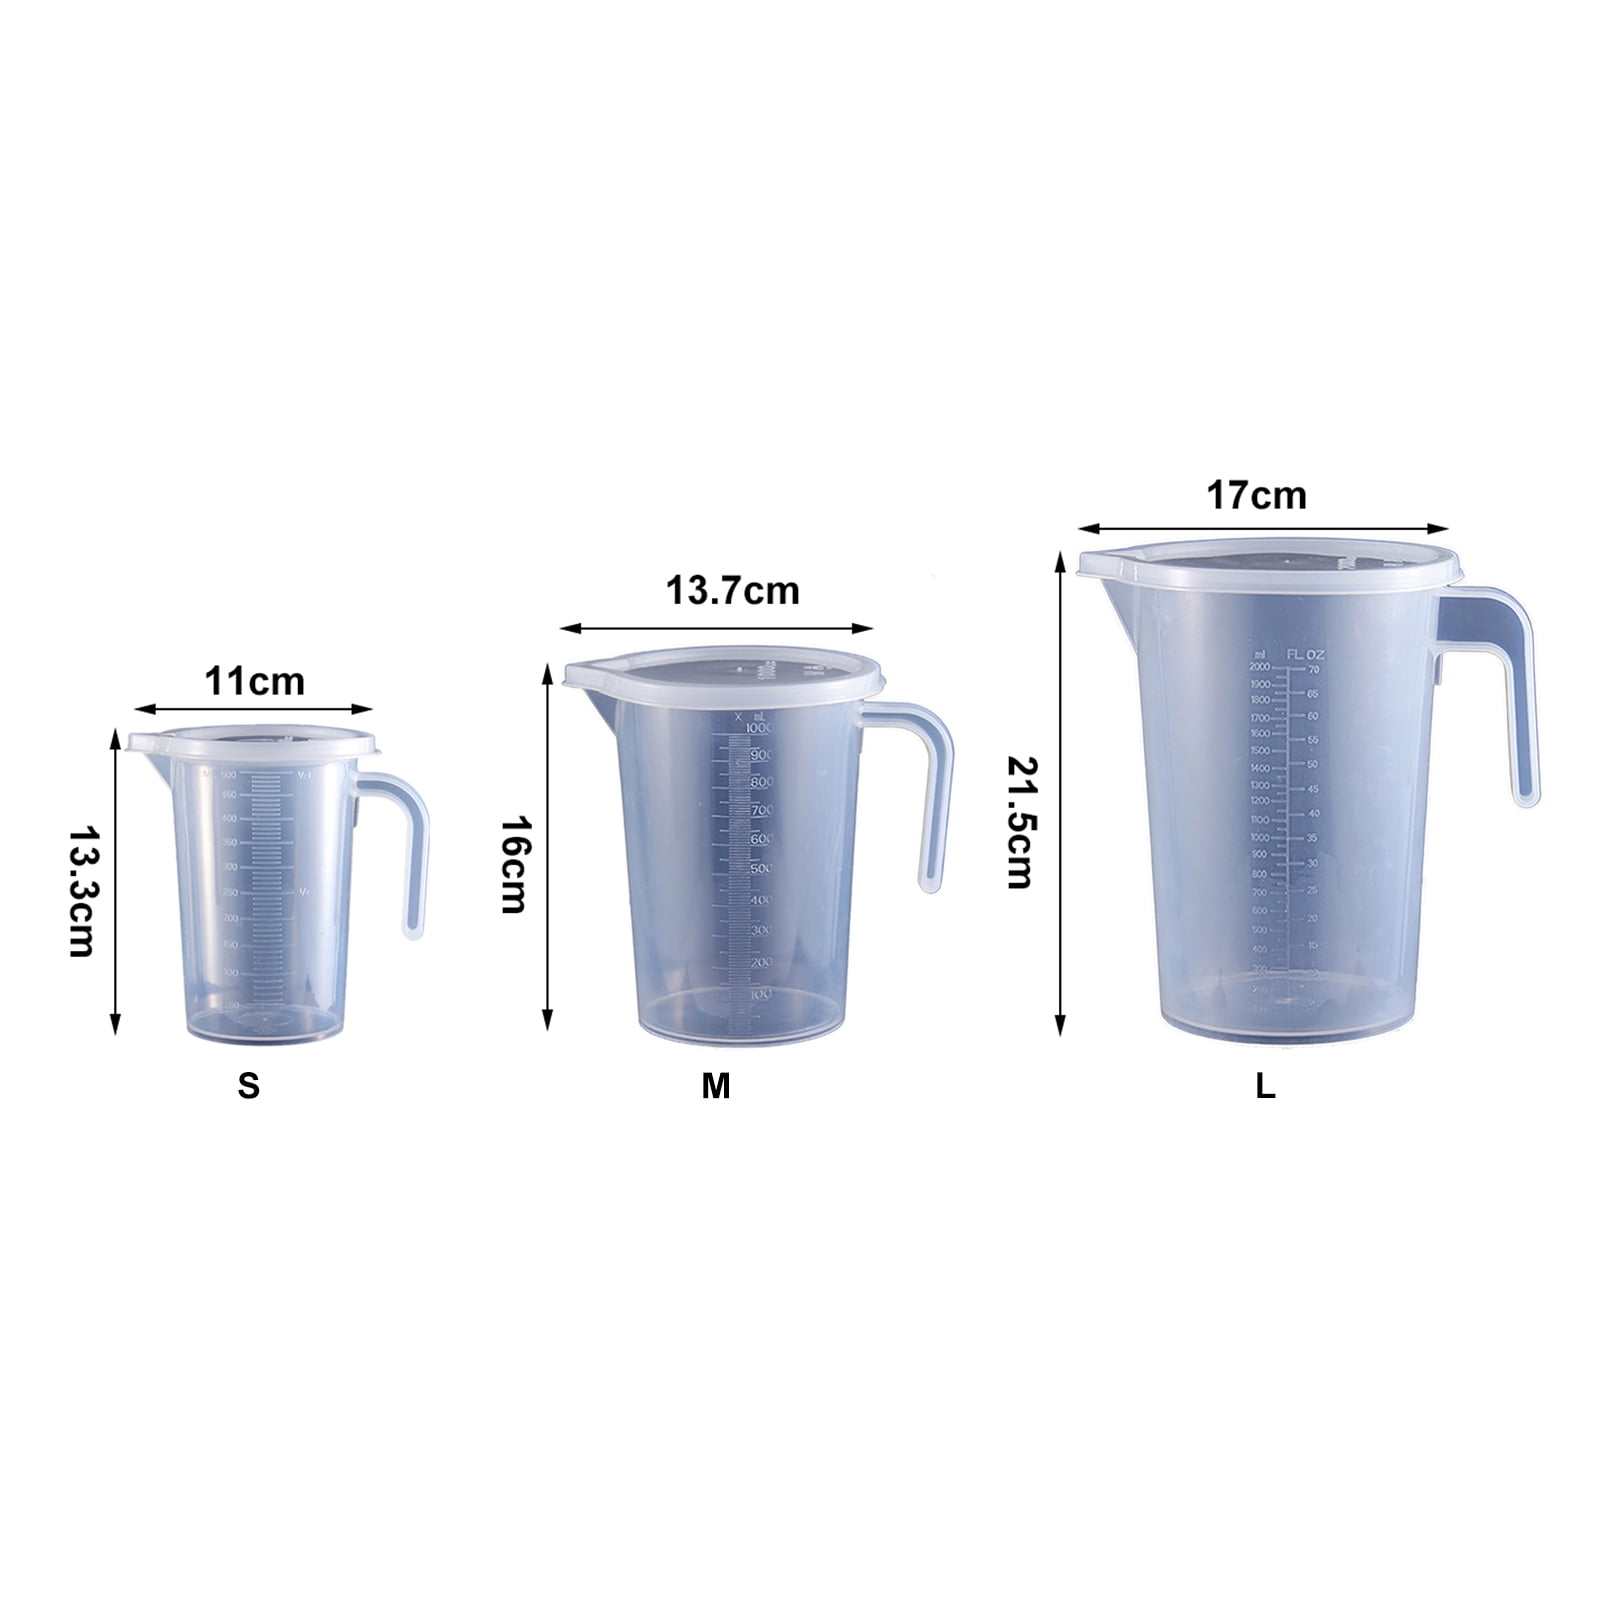 DOITOOL 4Pcs Stainless Steel Measuring Cup 40ml Graduated Medicine Cup  Liquid Measuring Jug with Scale Cooking Measure Cup for Baking Food Dry  Liquid